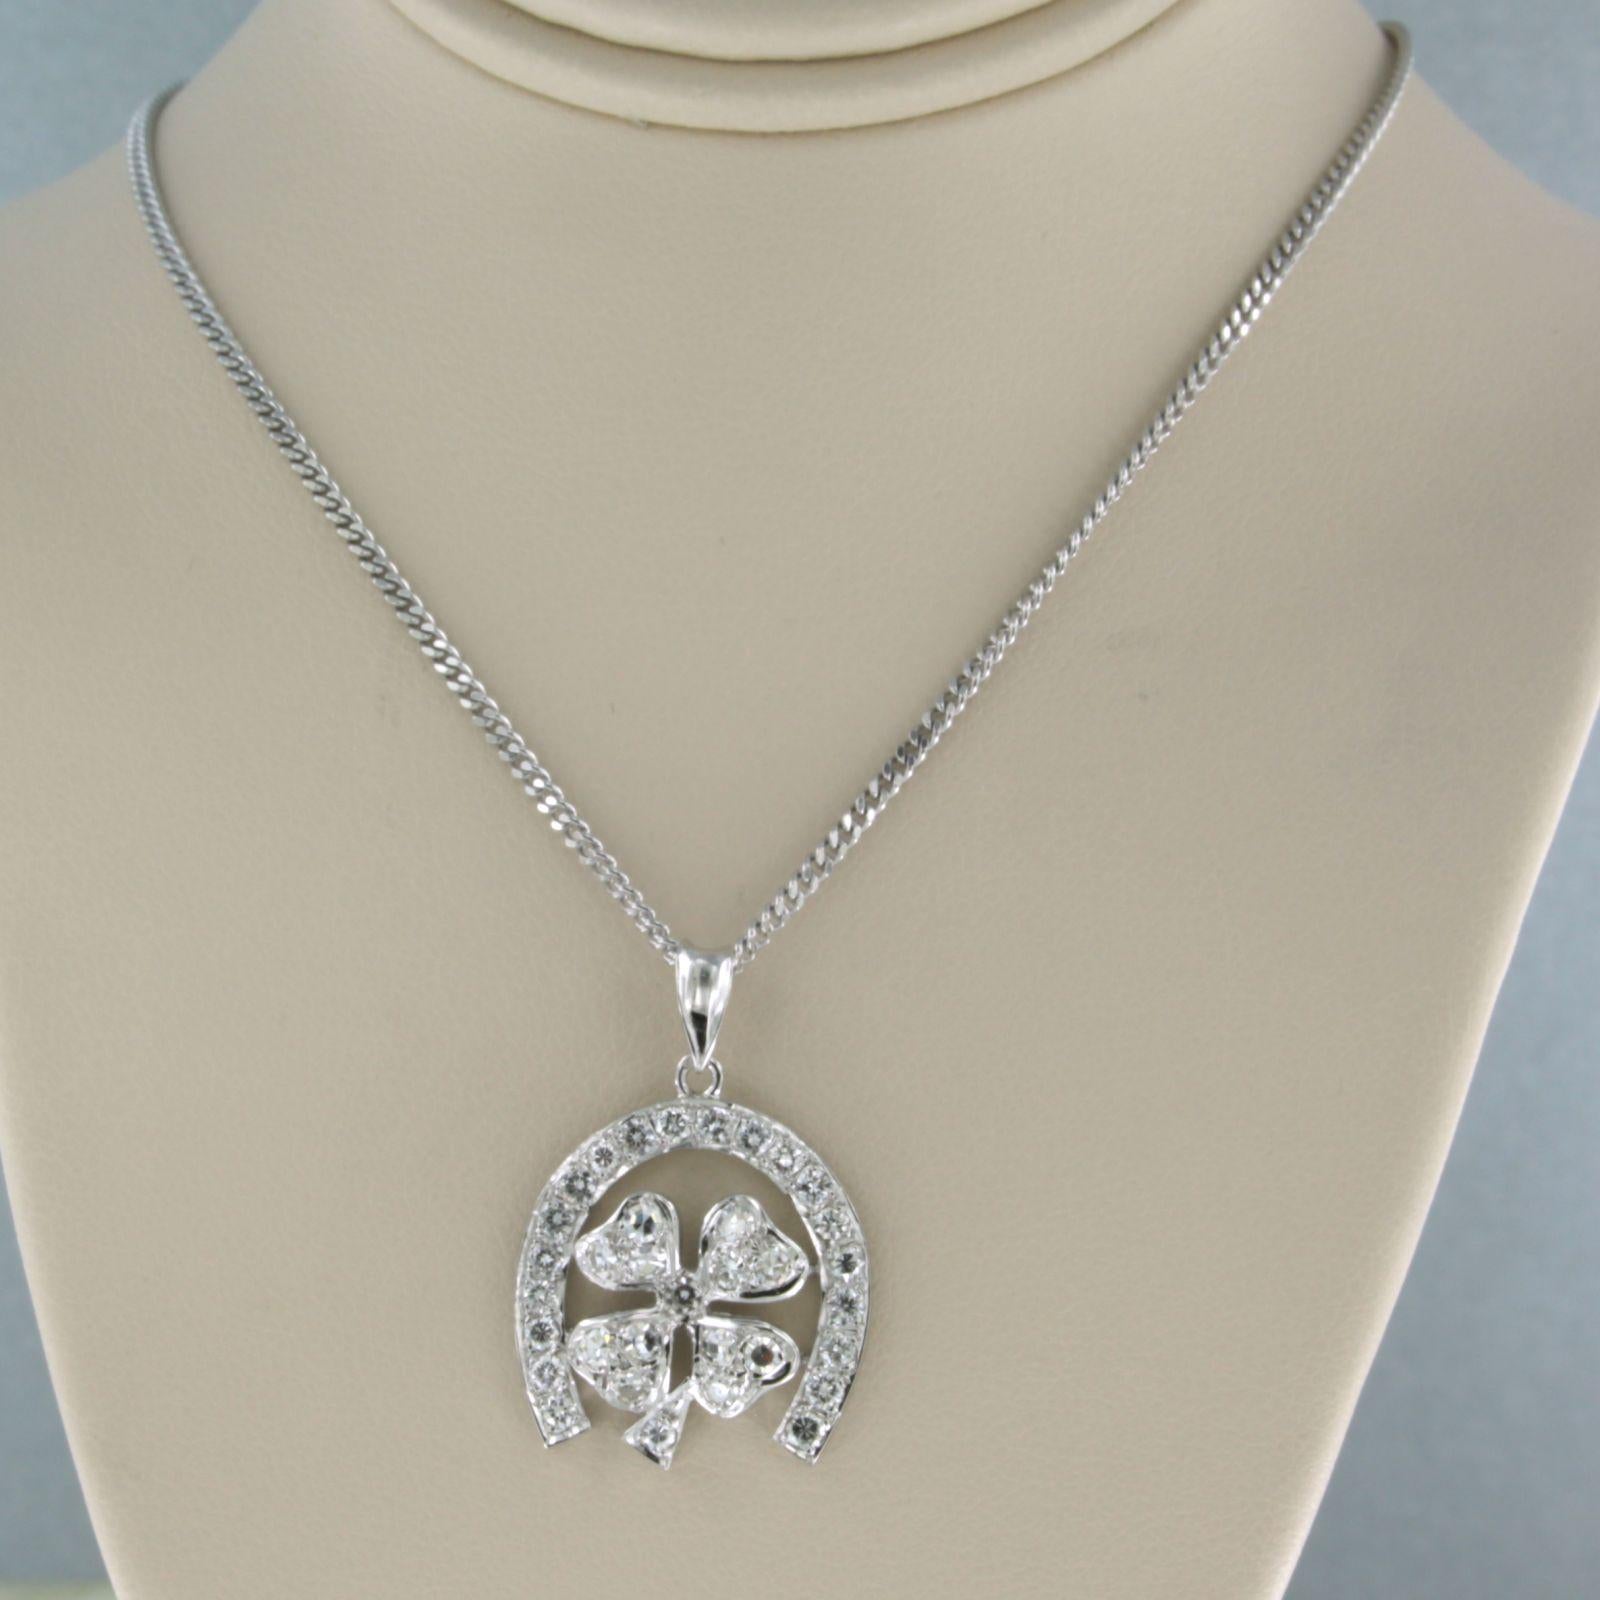 Lucky Charm Irish Leaves Pendant with Diamonds 0.80 carat, with 14k gold necklace

The necklace is 40 cm long (15.7 inch) and 1.7 mm wide (0.07 inch)

The pendant is approx. 2.8 cm heigh (1.1 inch) and 1.9 cm wide (0.7 inch)

Total weight is 7.7